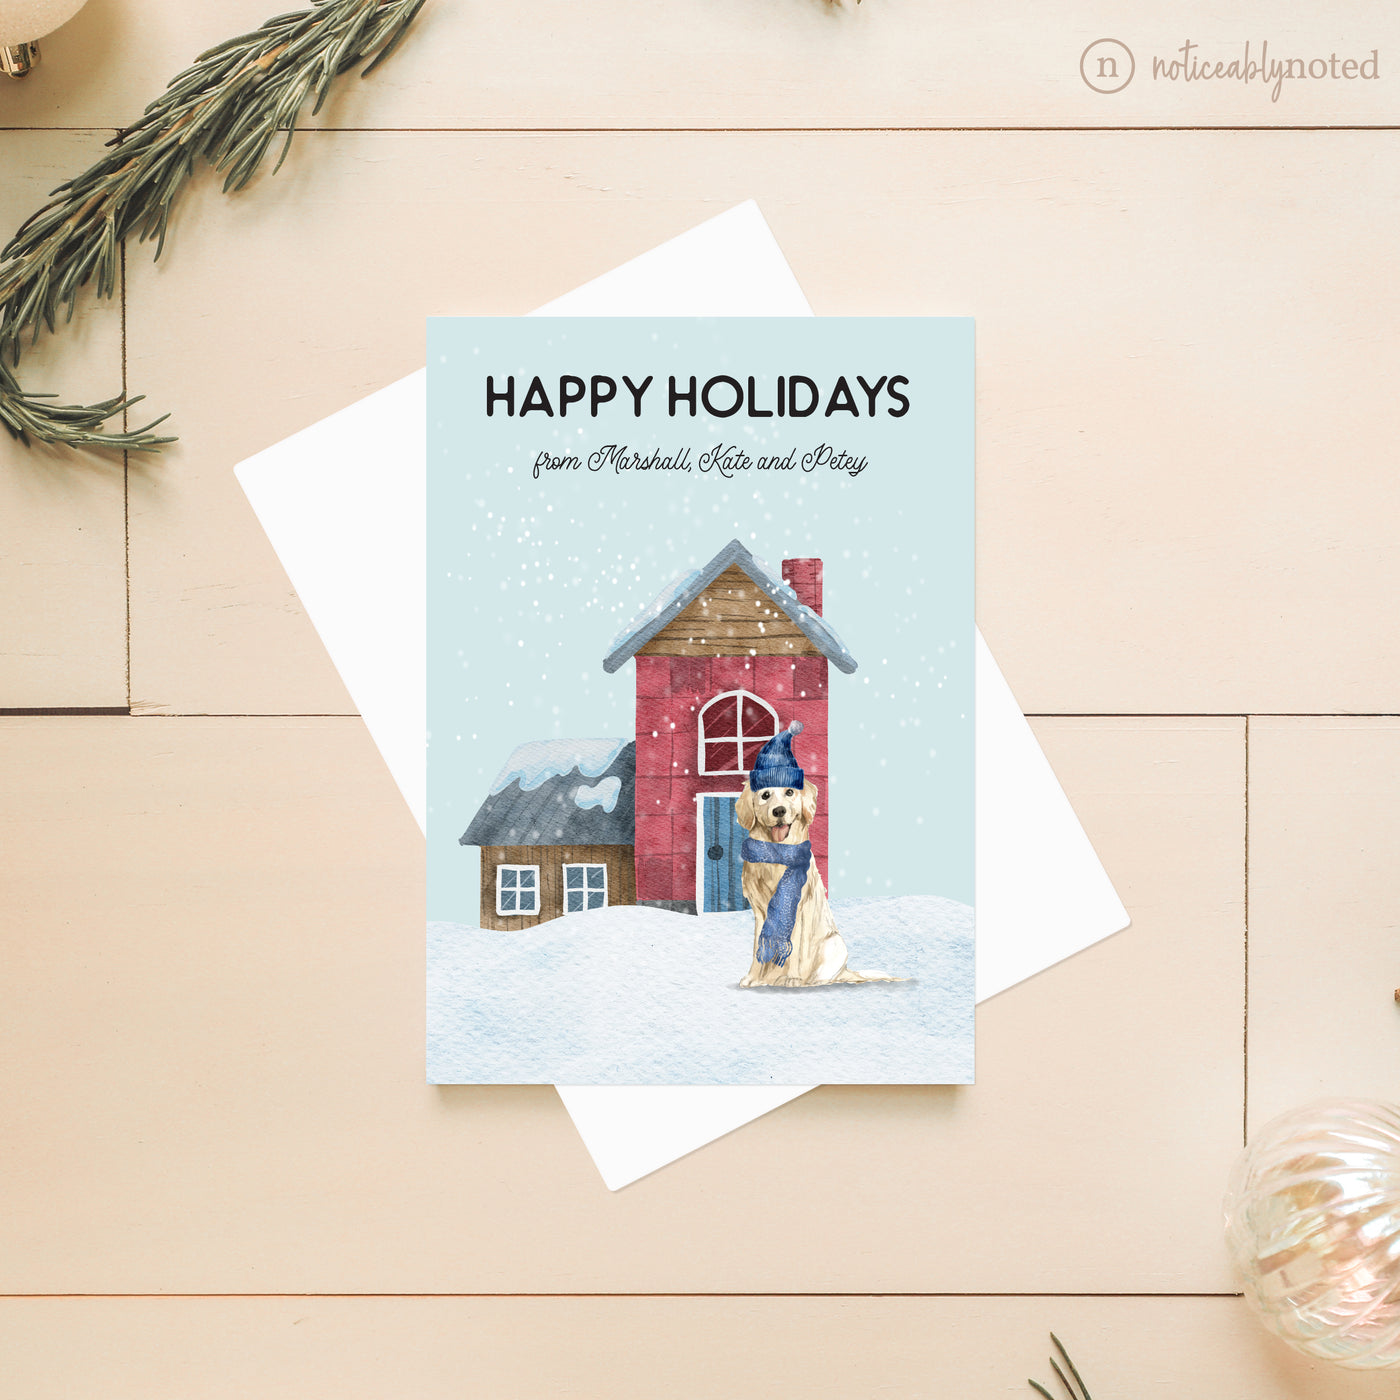 Golden Retriever Holiday Card | Noticeably Noted